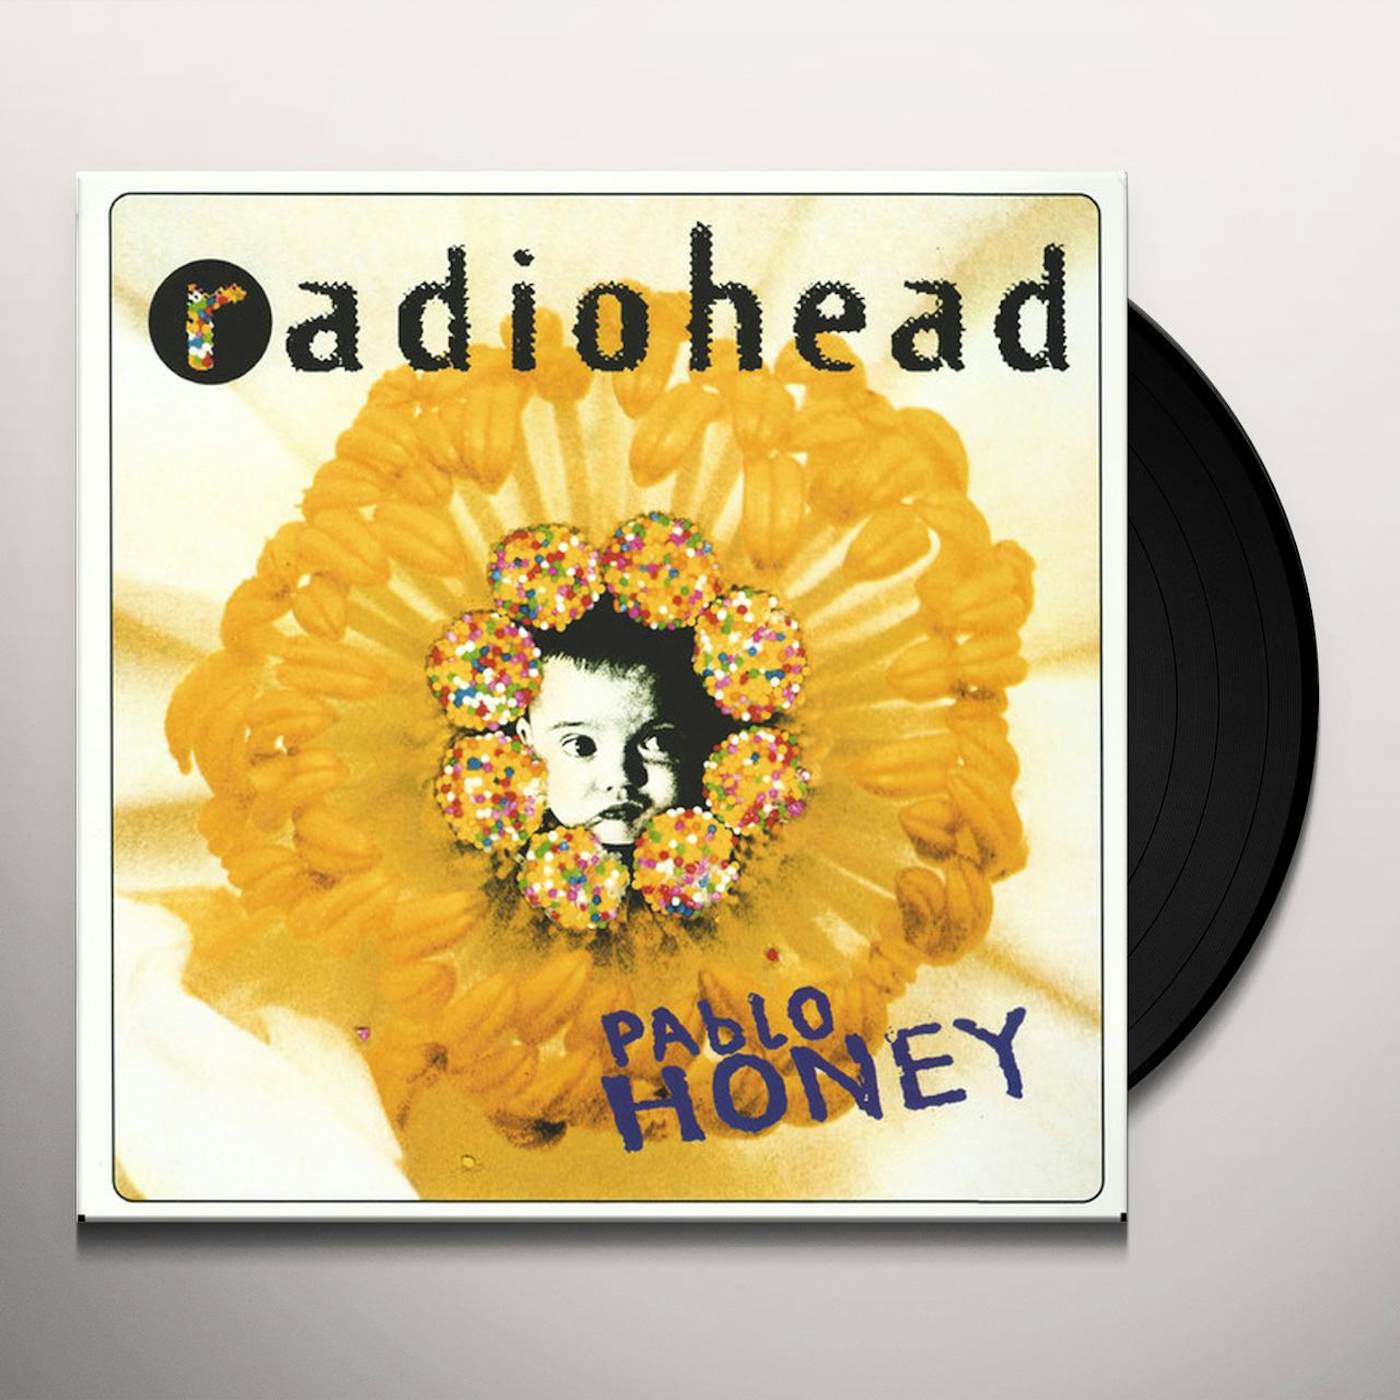 NEARLY EVERY RADIOHEAD VINYL - My first post here so I wanted to